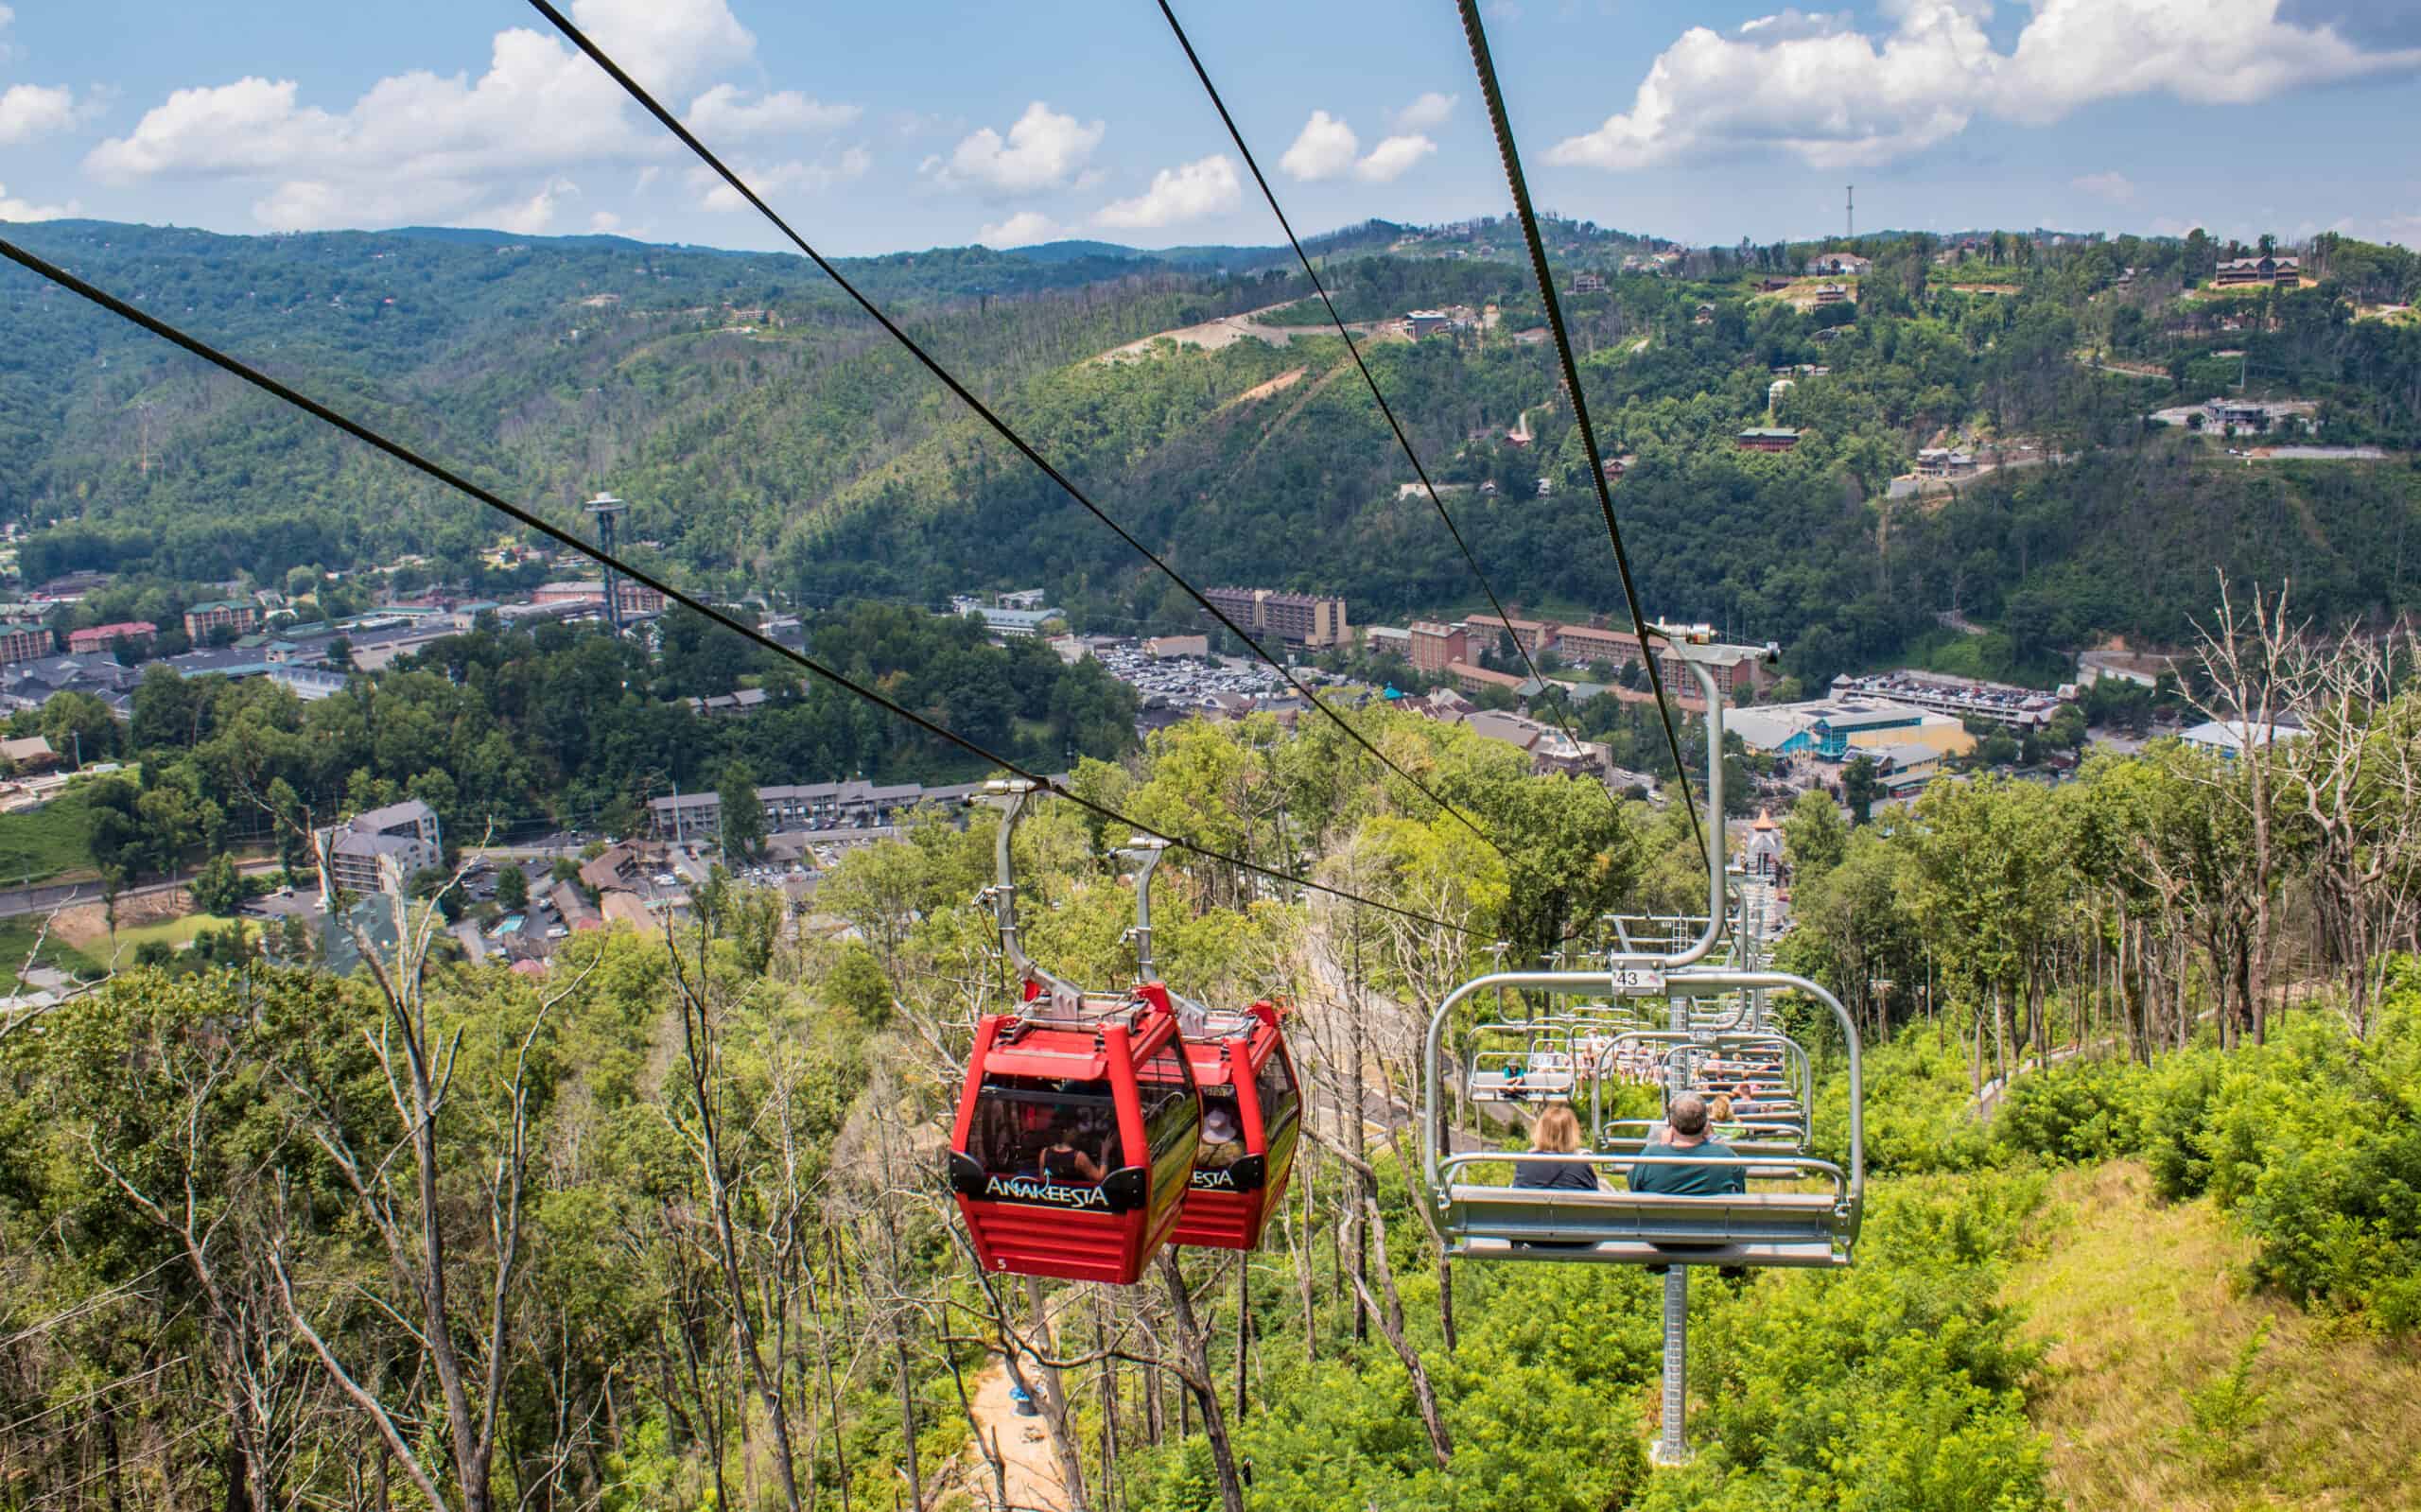 anakeesta's chairlift and gondolas